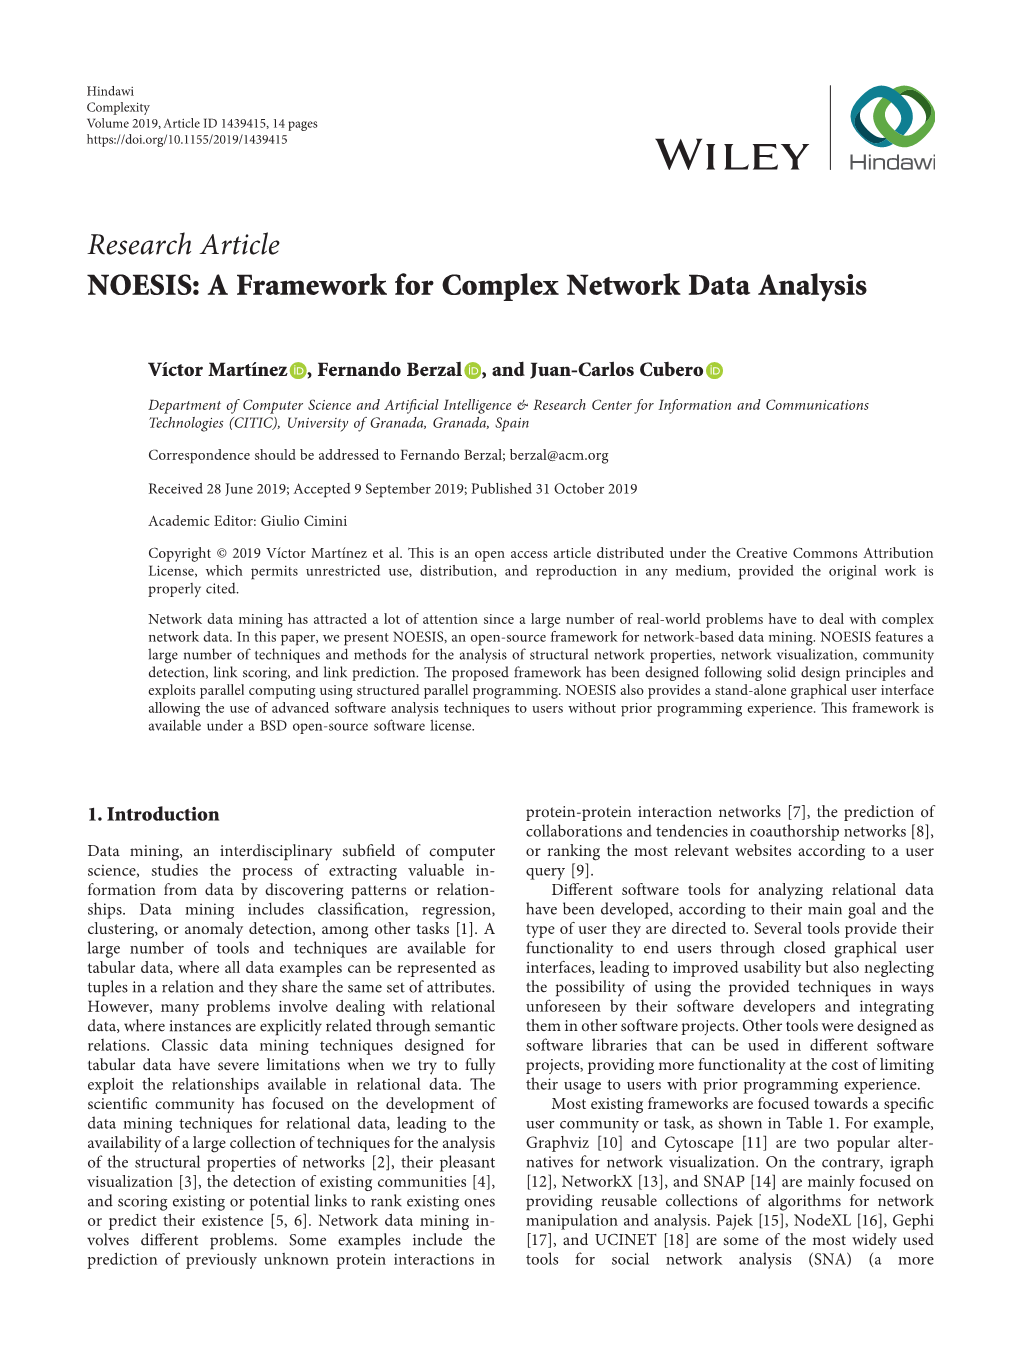 NOESIS: a Framework for Complex Network Data Analysis